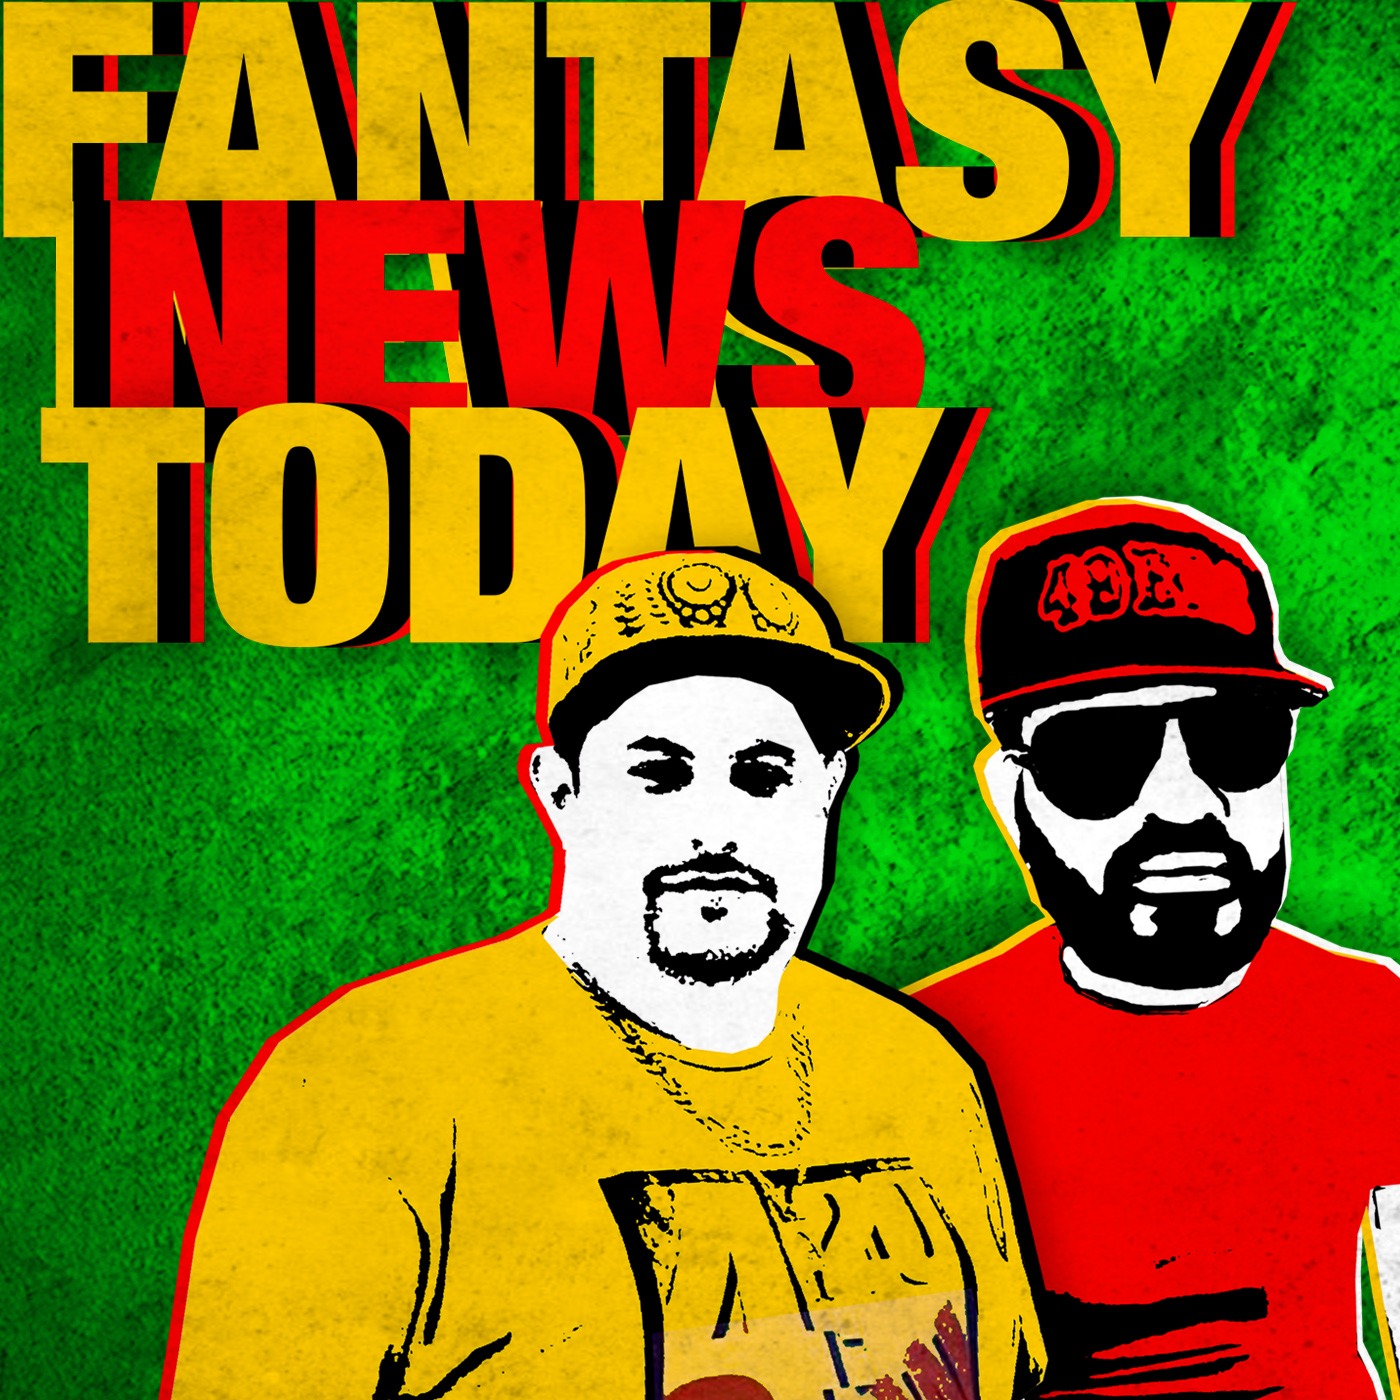 Fantasy Football News Today LIVE, Wednesday May 18th Image